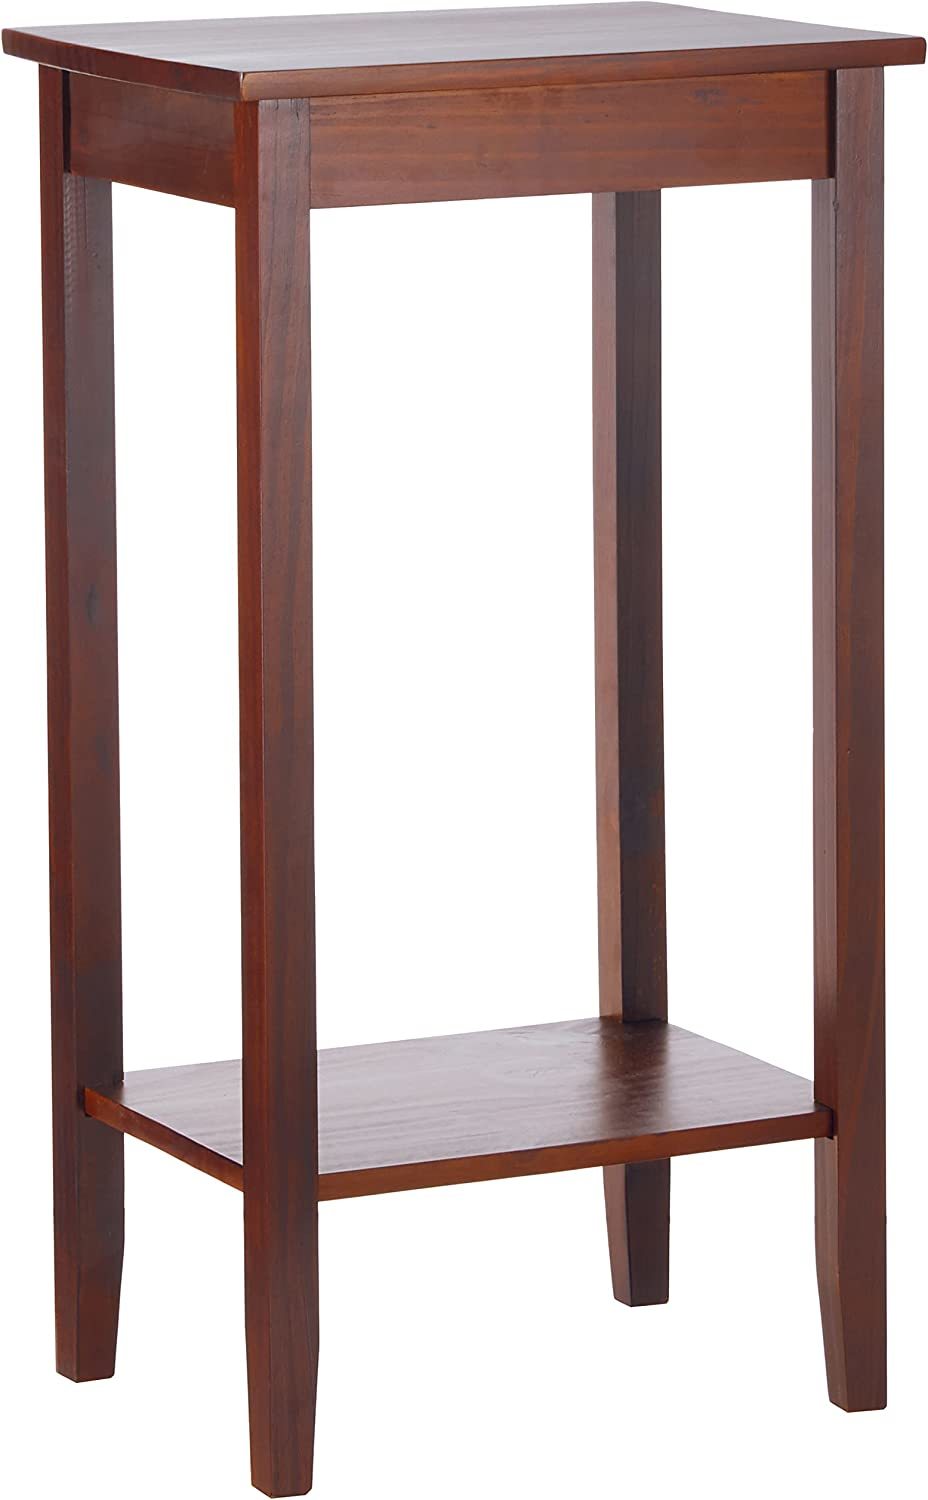 Dhp Tall Rosewood End Table. - $103.92